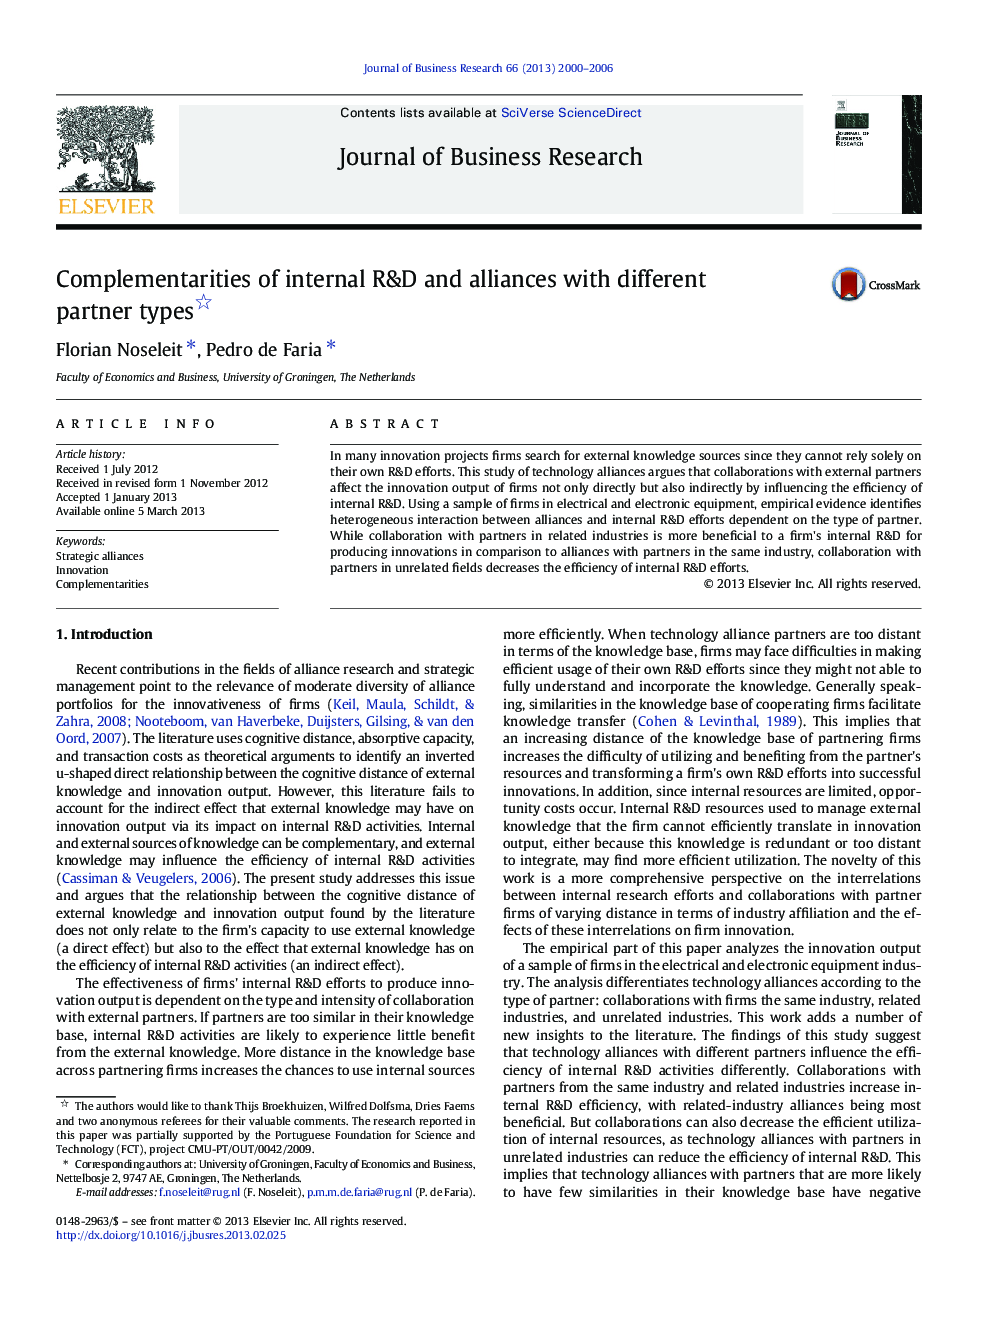 Complementarities of internal R&D and alliances with different partner types 